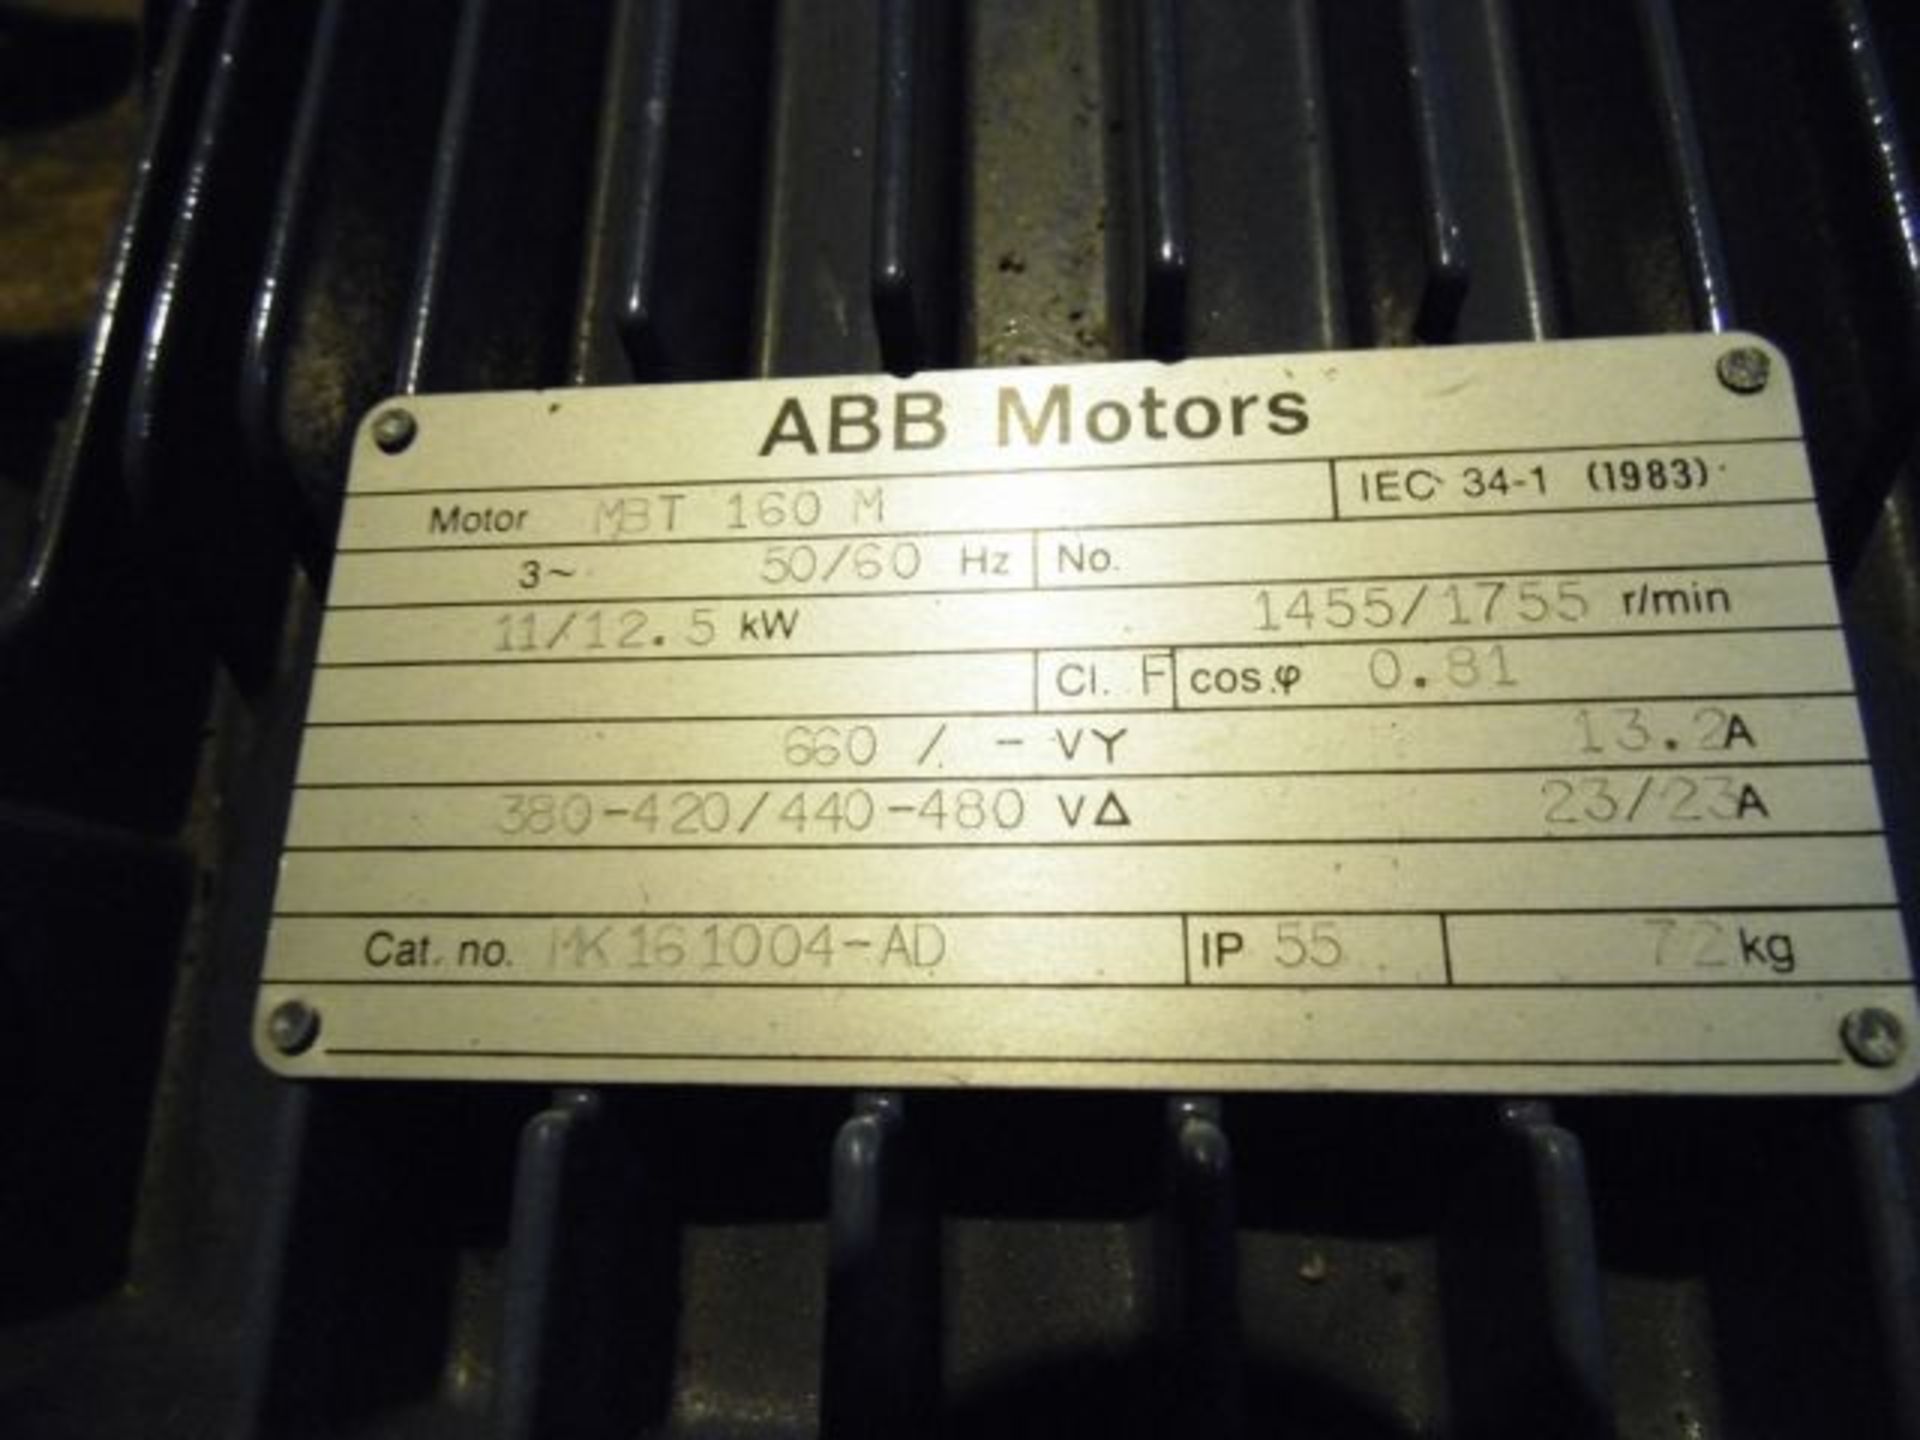 * ABB 11/12.5kw 3 Phase Motor; Type MBT 160m; 72kg; 1455 R/Min. Loaded onto Buyer's Transport - Image 2 of 2